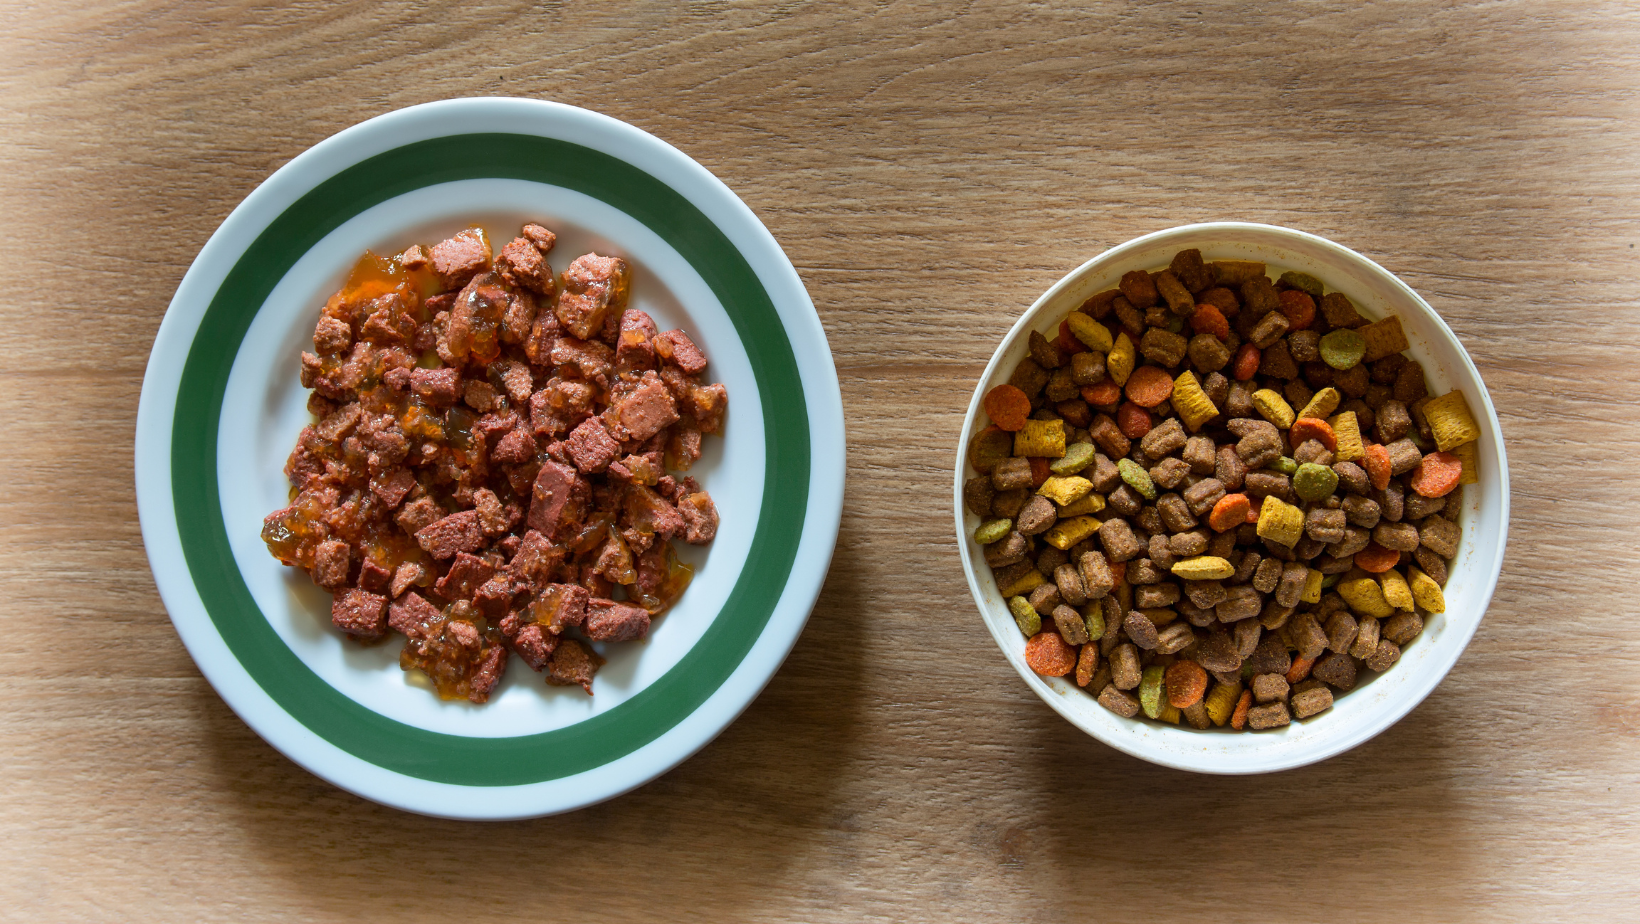 Bowls of wet and dry cat food, side-by-side on a table.